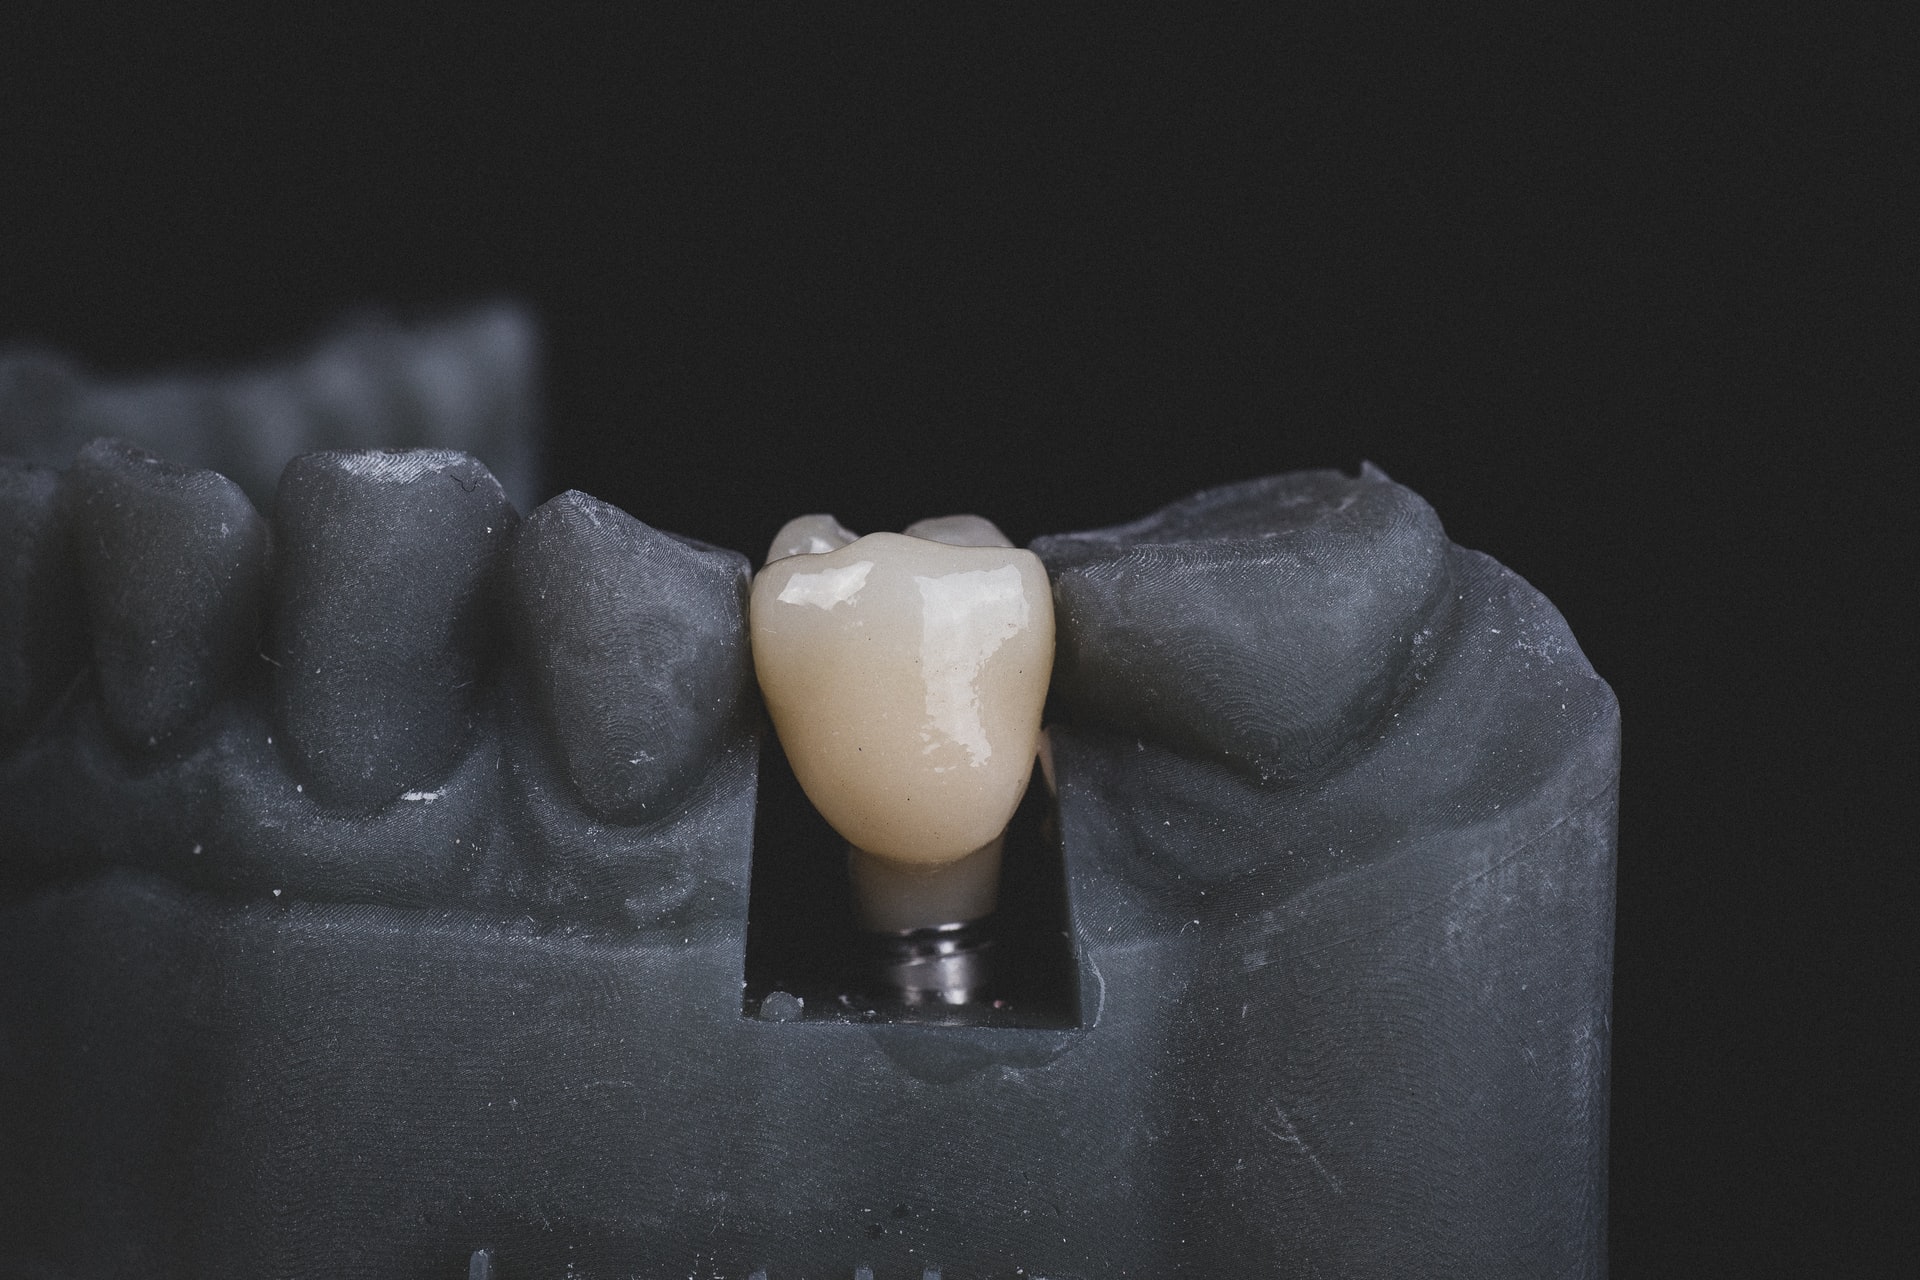 bridges and implants - black and white image of teeth and jaw with dental implant and crown shown in color.